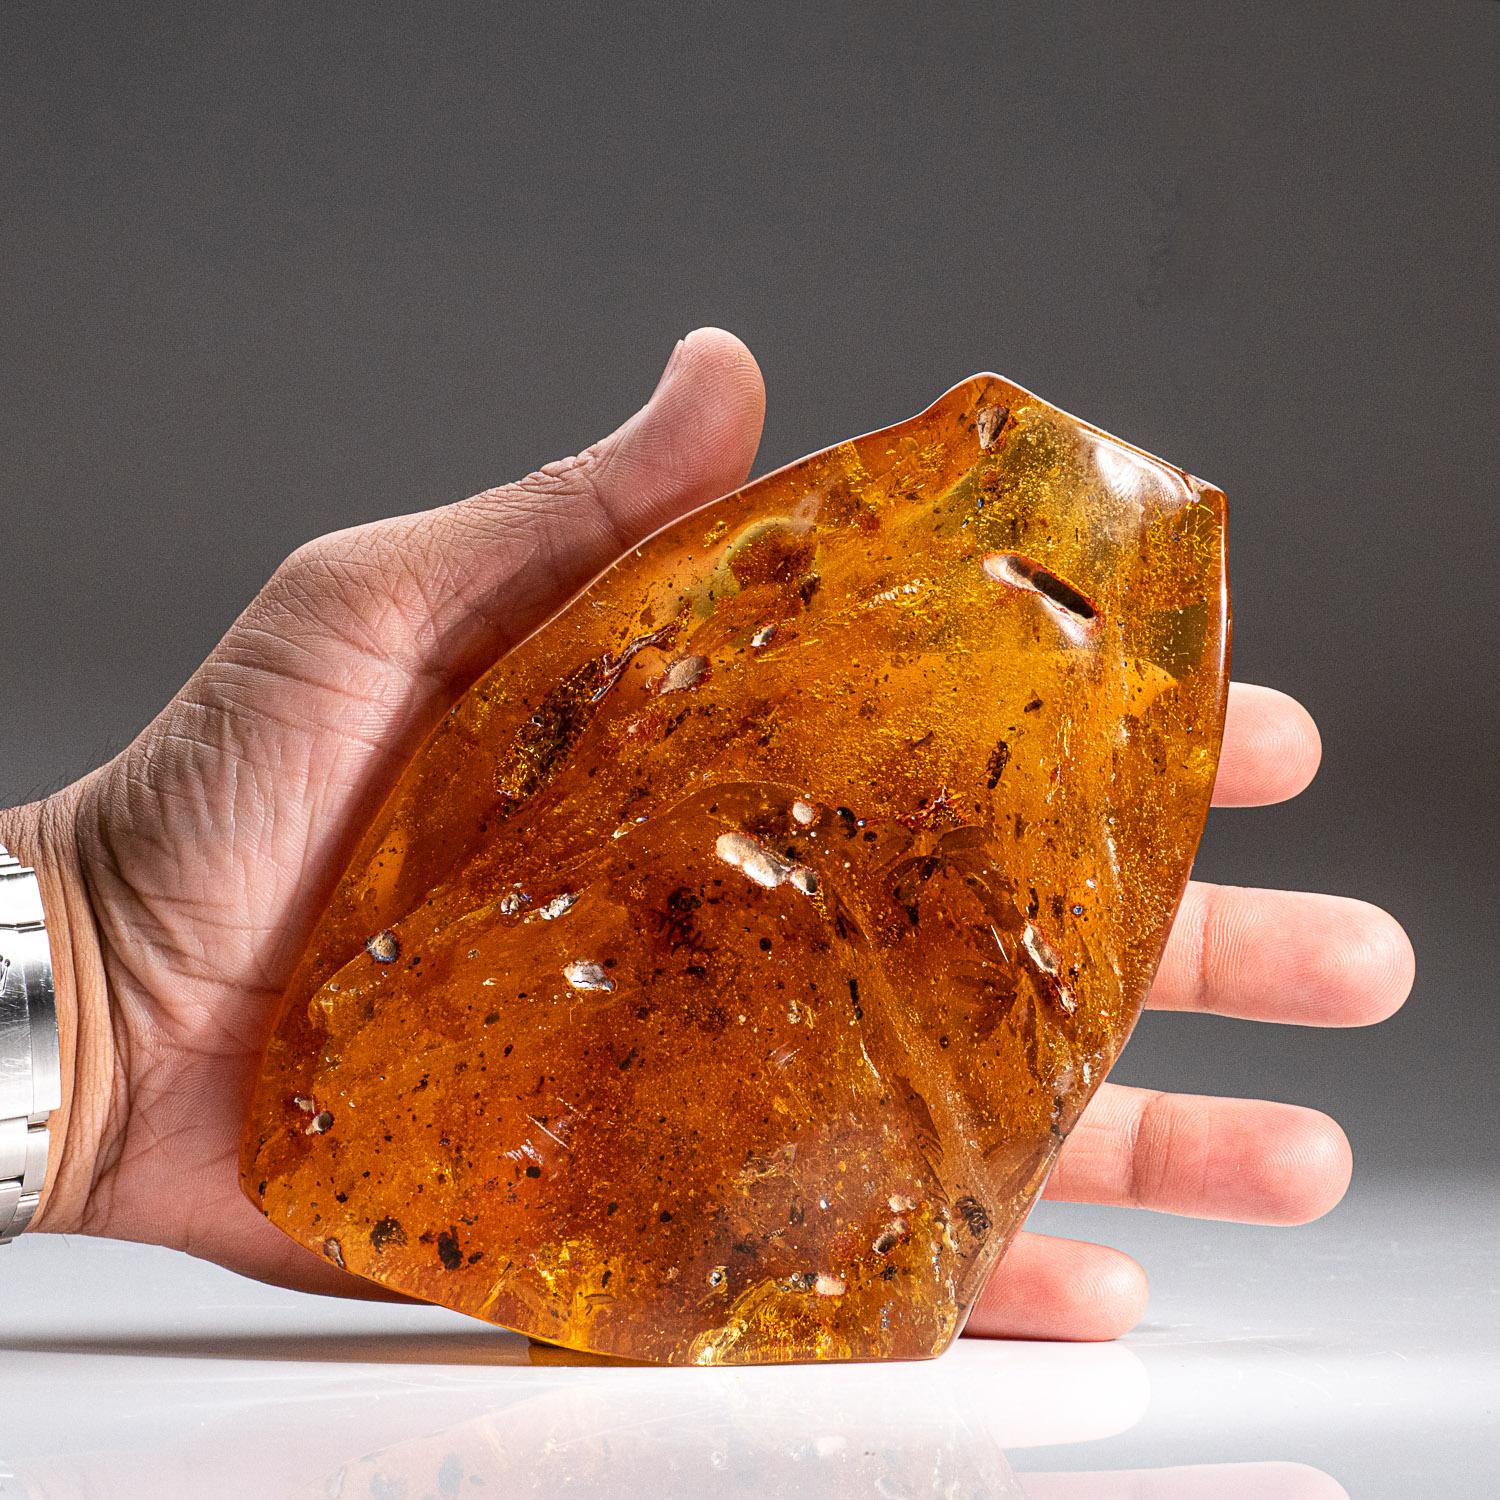 Here we have large transparent amber with many inclusions of fossilized insects. It's polished on the exterior to show the internal clarity. It is some of the highest quality amber in the world. It is harder than most other ambers, which makes it